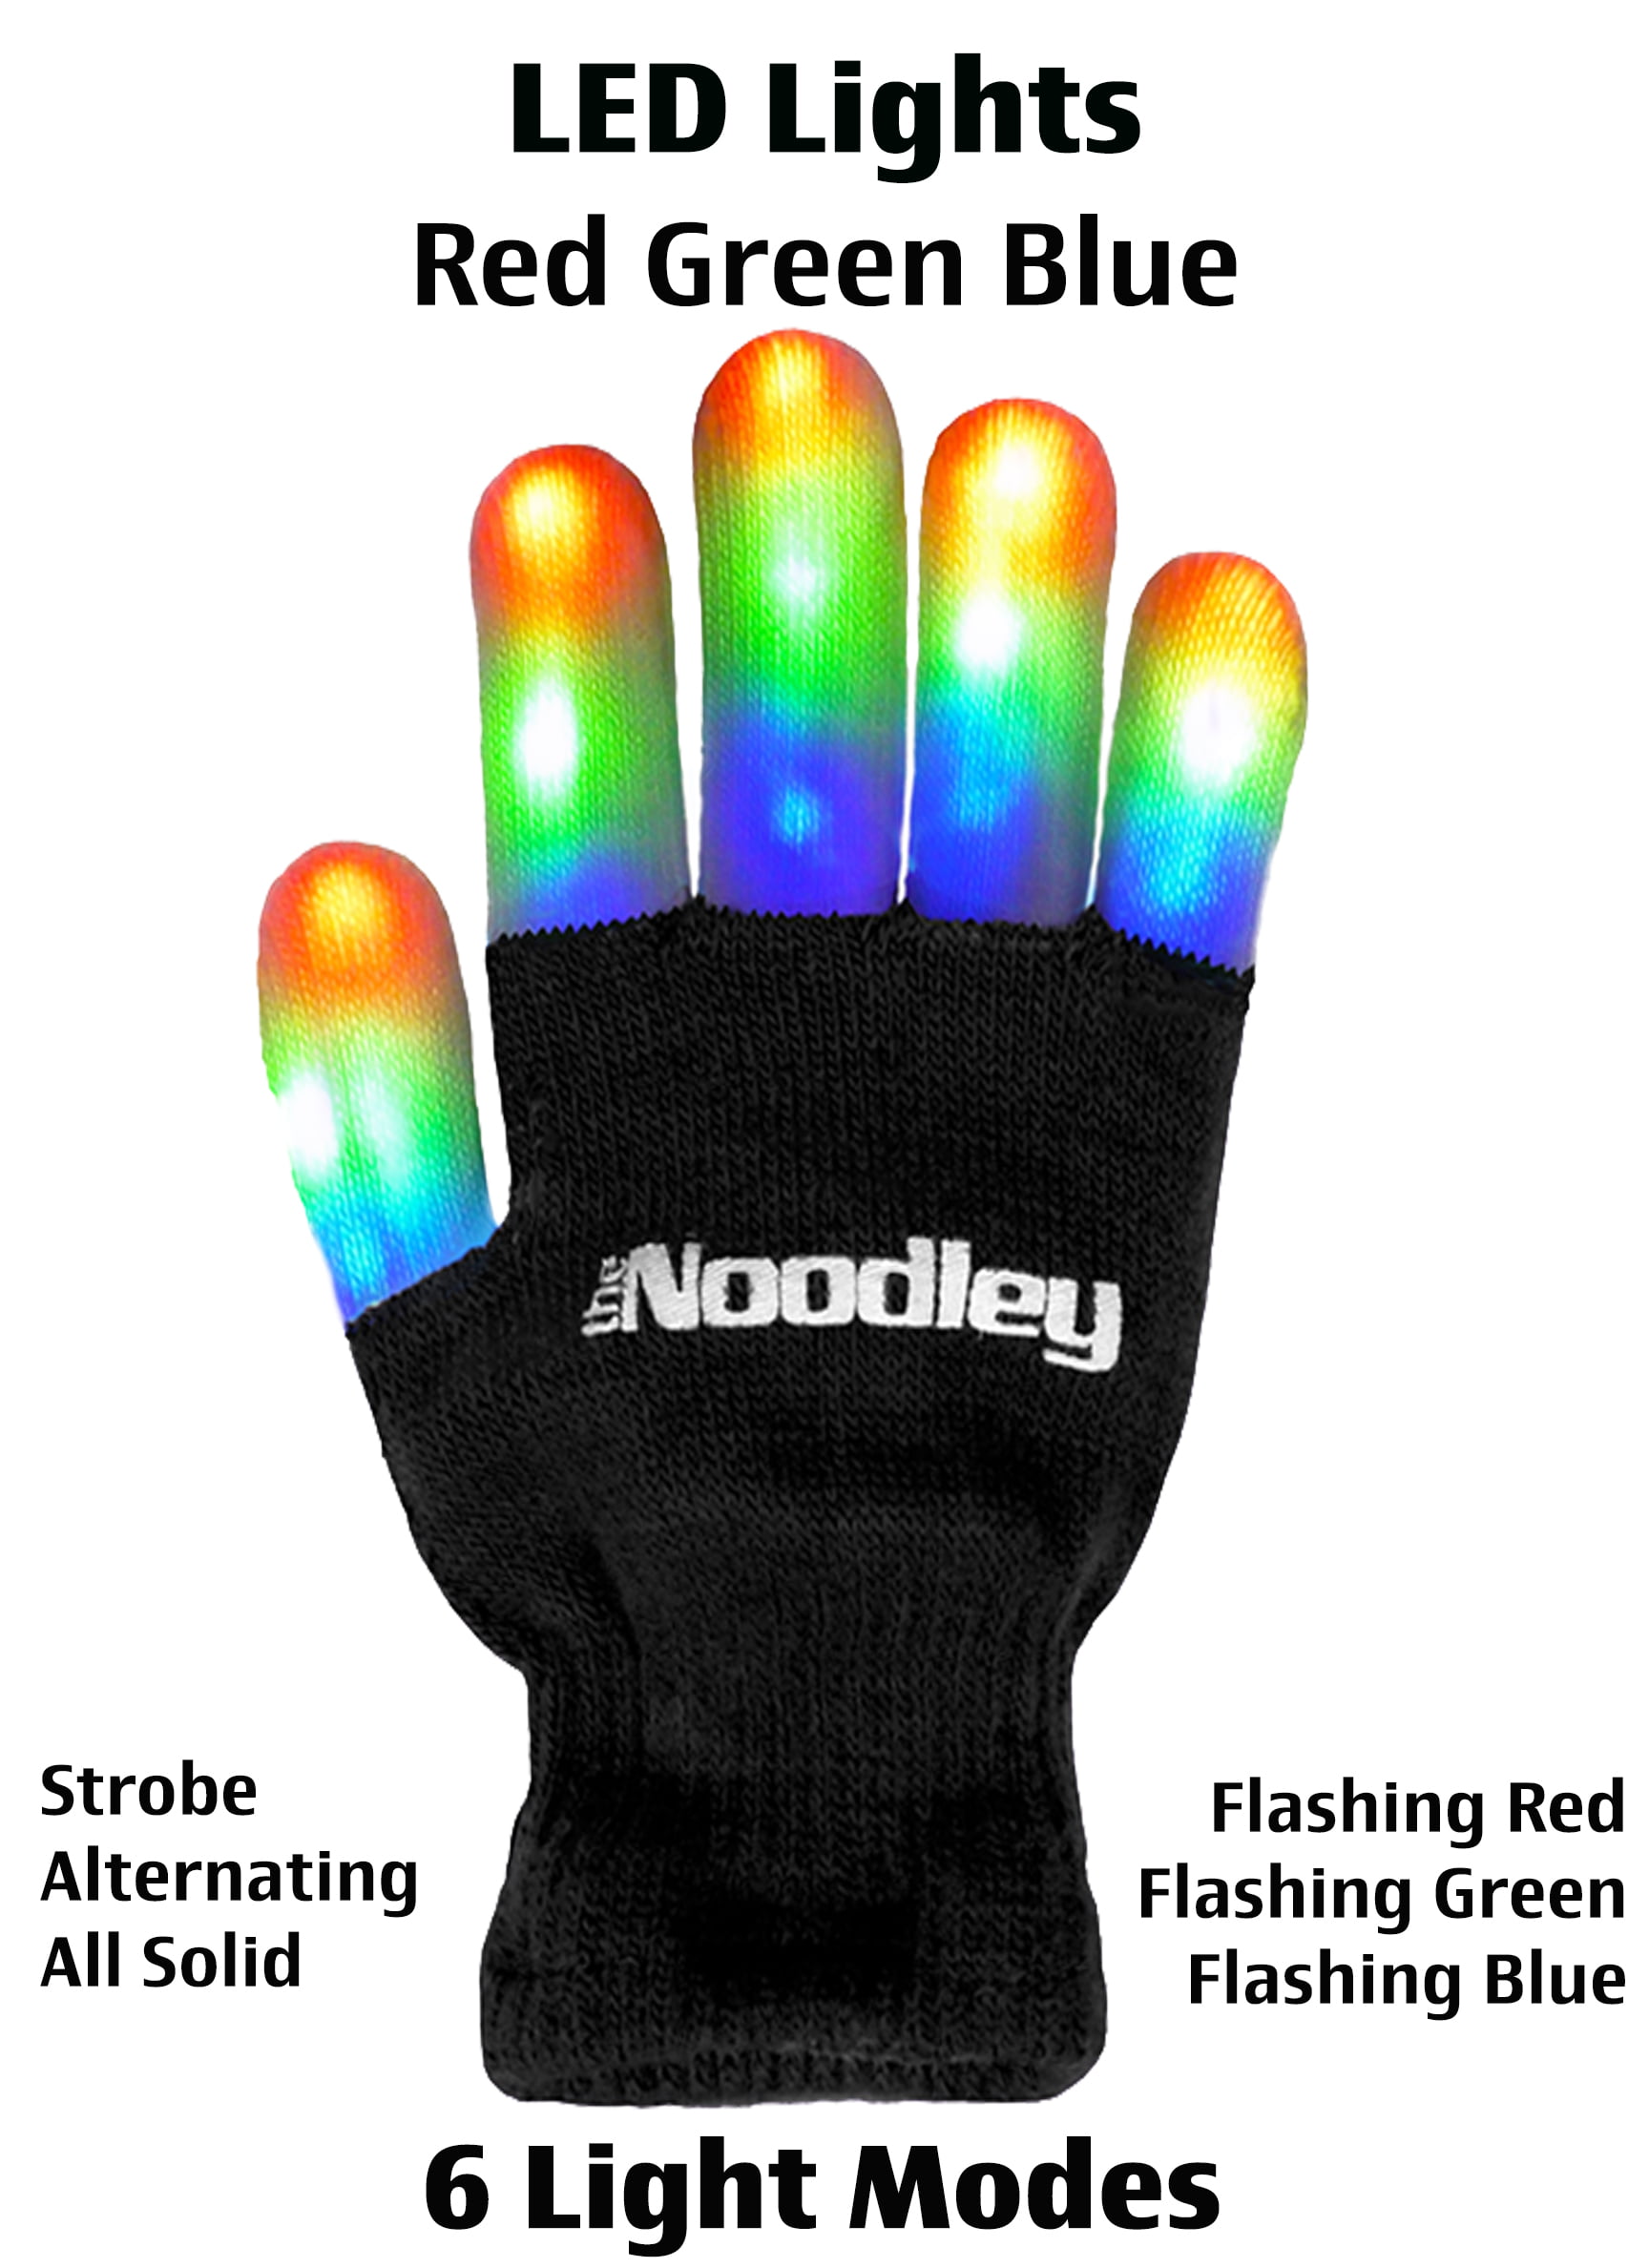 The Noodley LED Light Up Gloves for Kids Glow in the Dark Boys Girls ONE PAIR 